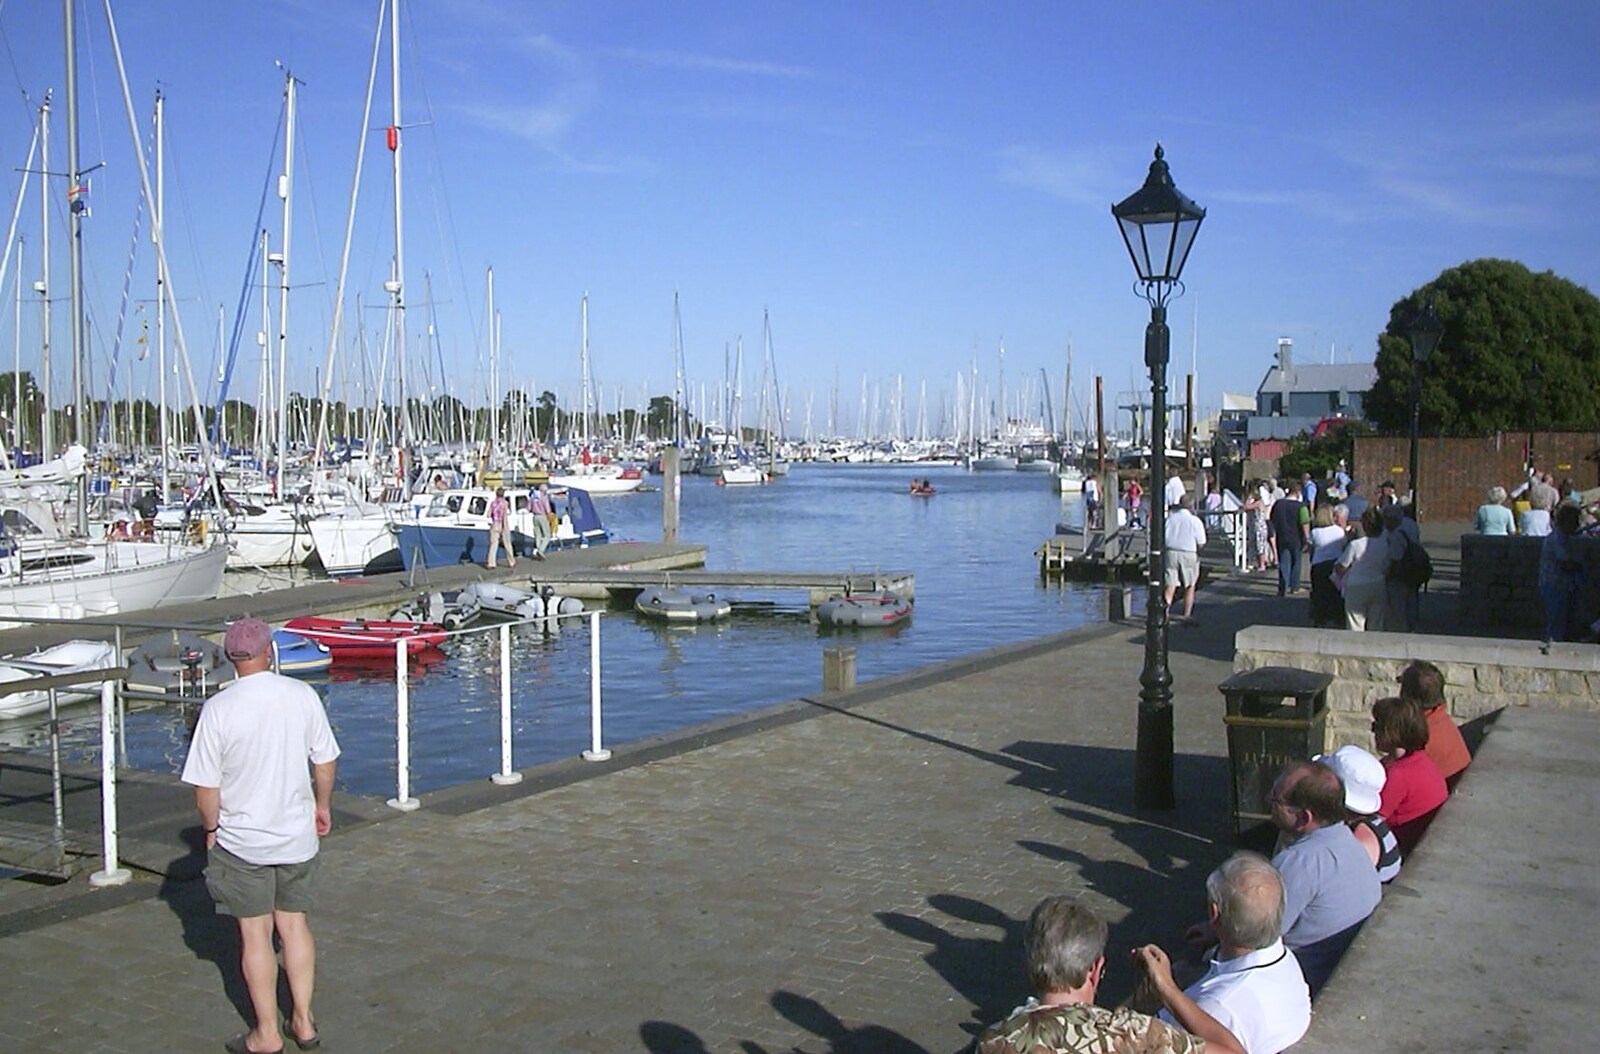 Lymington Quay and river from Cowes Weekend, Cowes, Isle of Wight - 7th August 2004